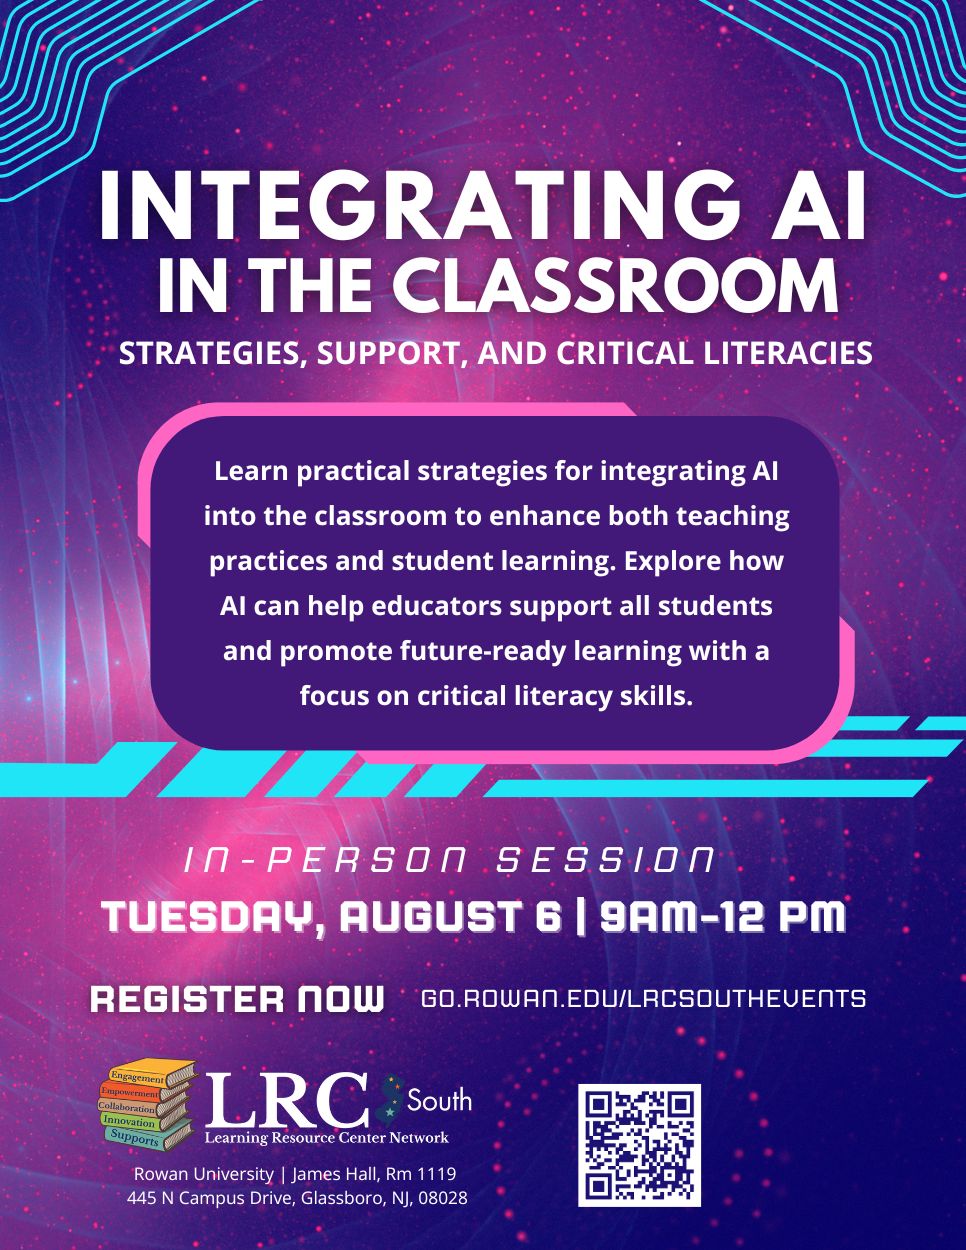 LRC-South Integrating AI in the Classroom 